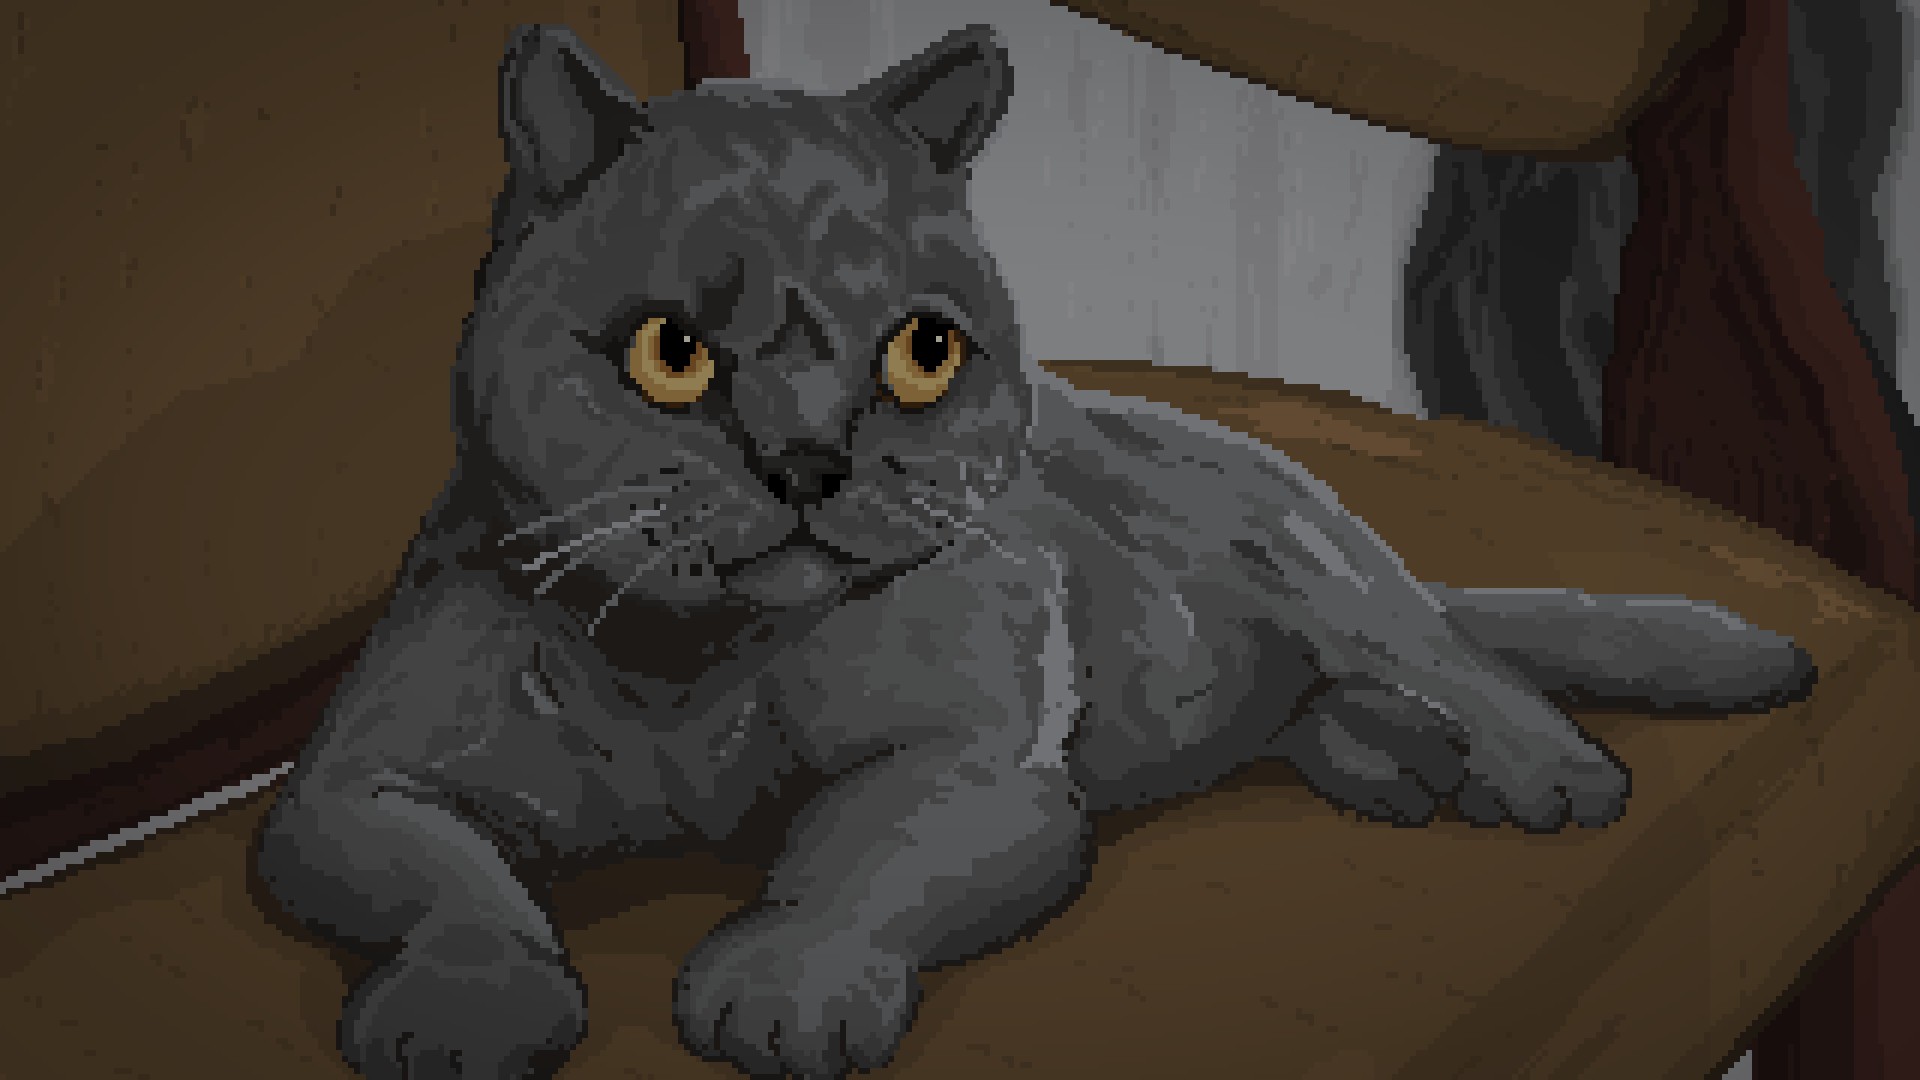 Though a few of them are quite pleasant. Incidentally, this is the least creepy image of this cat in the whole game.